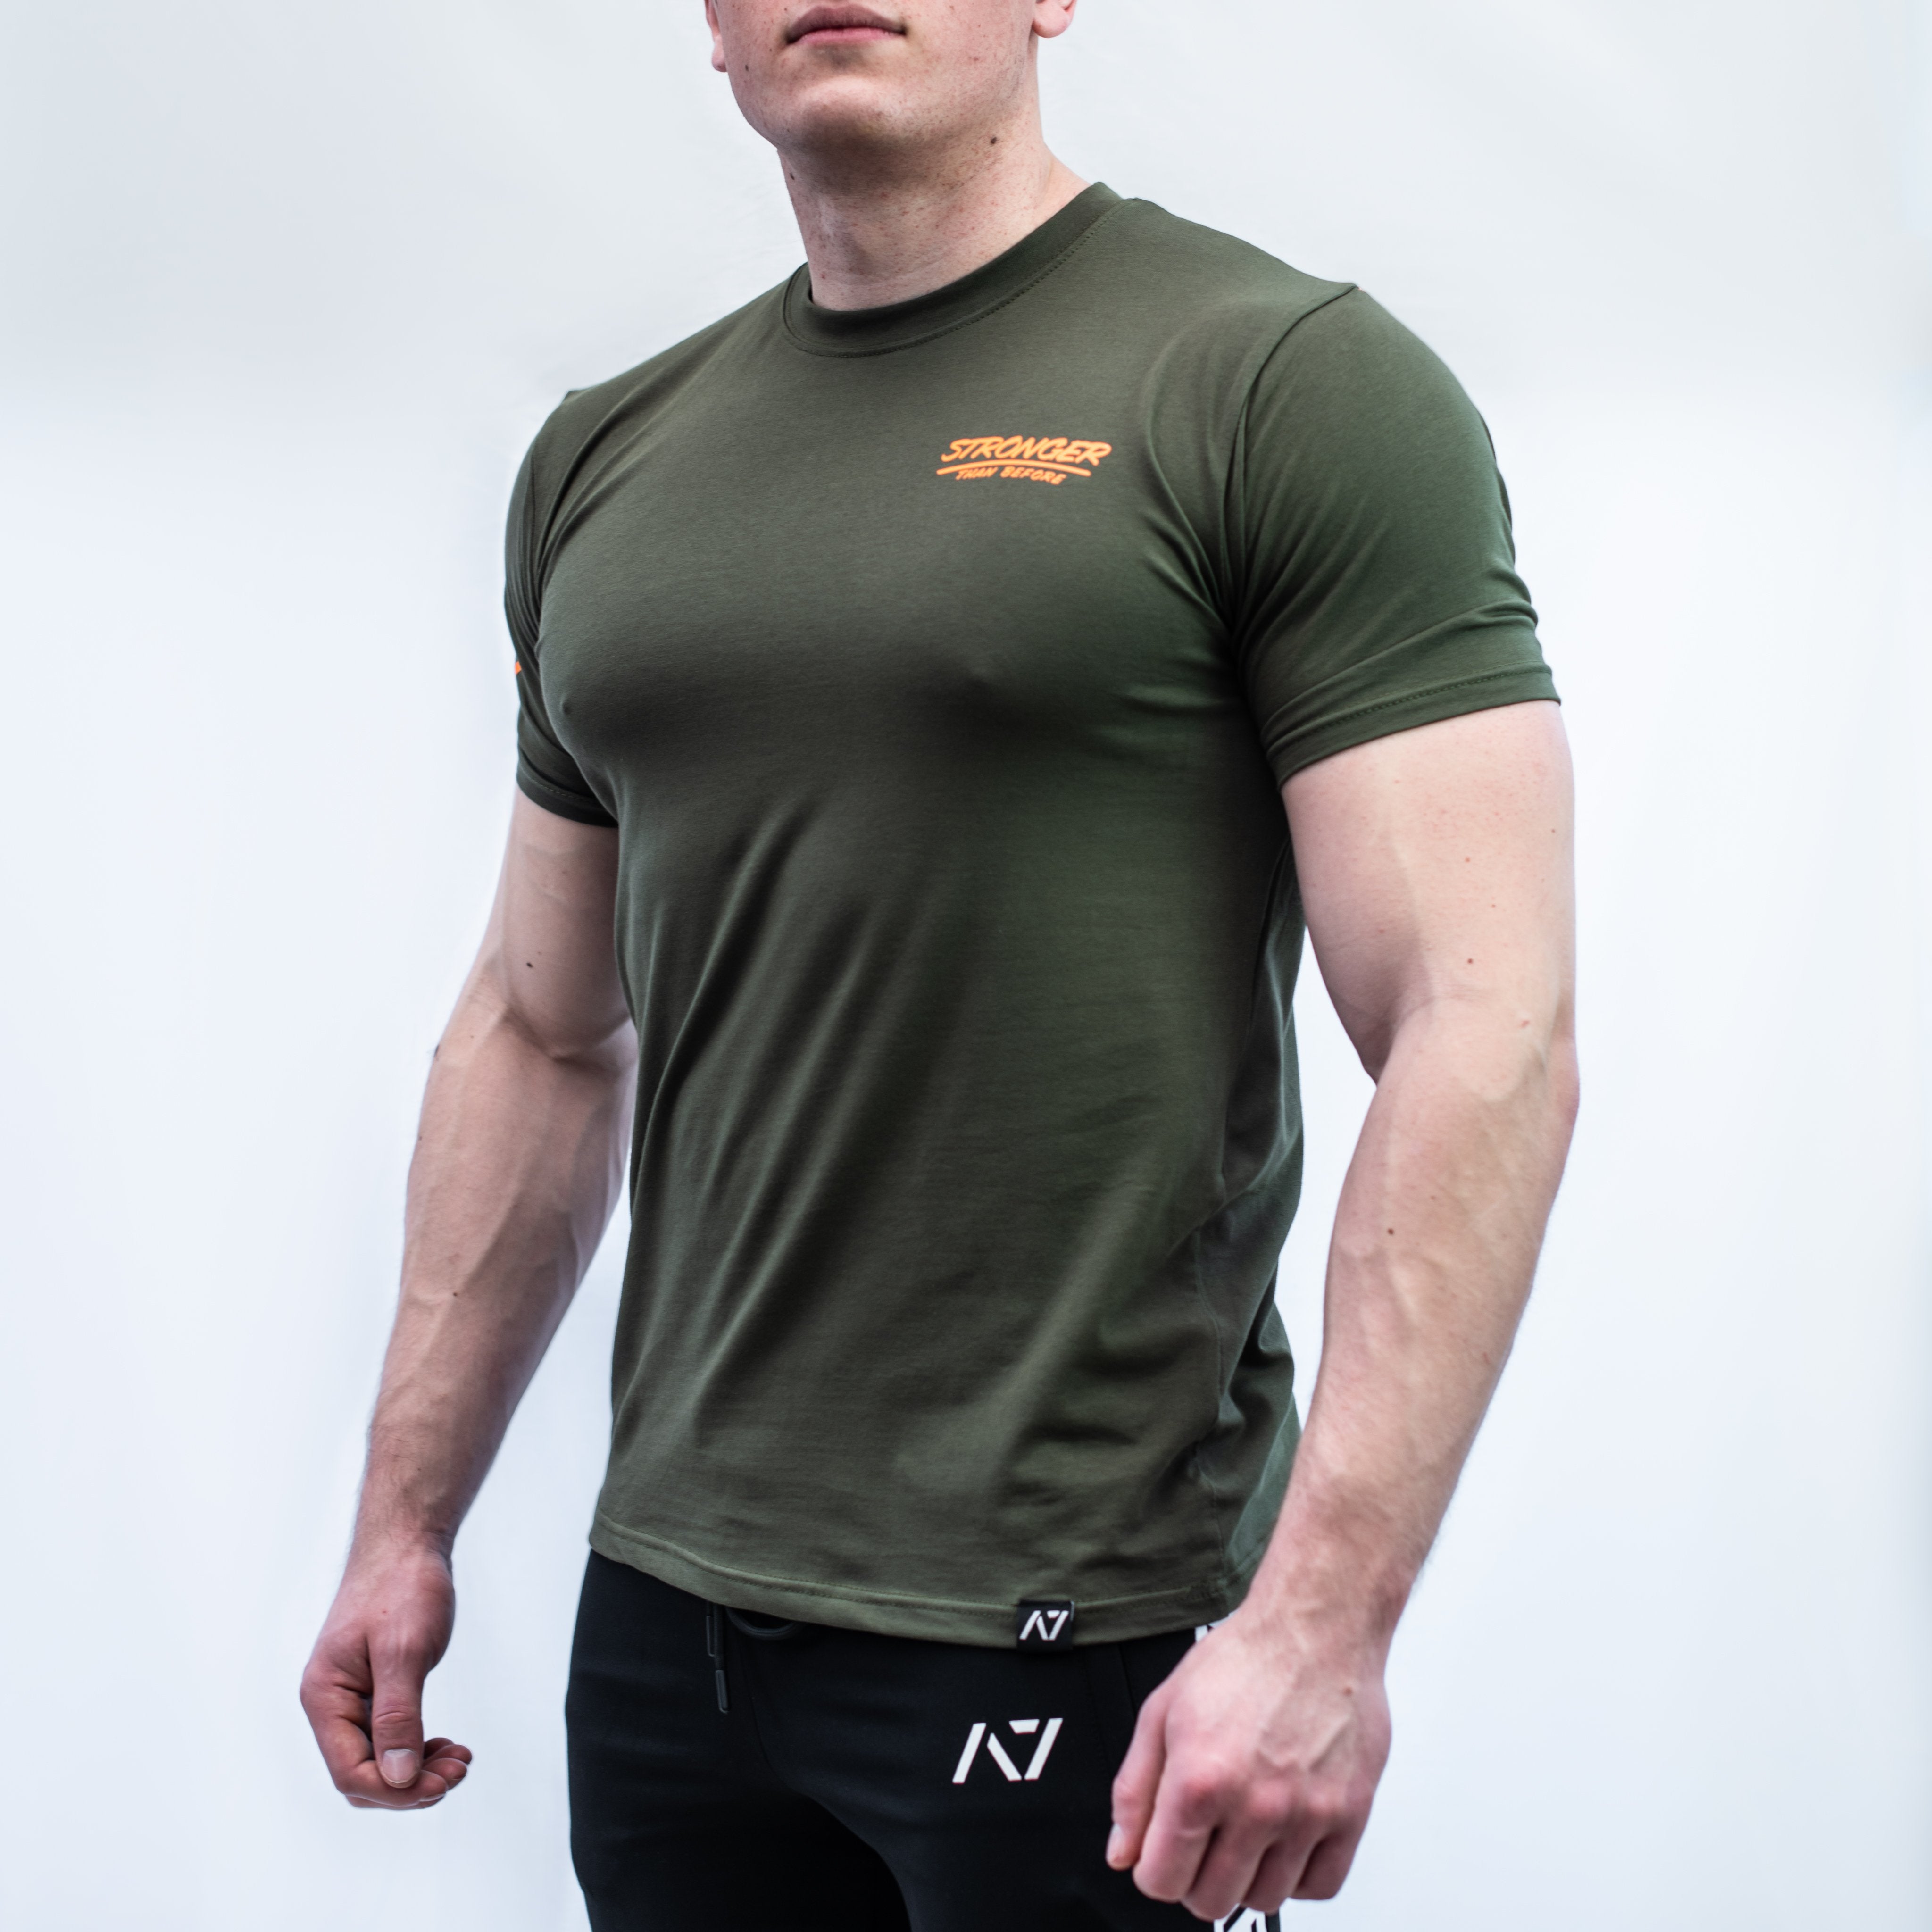 A7 MA-1 Bar Grip T-shirt, great as a squat shirt. Purchase MA-1 Bar Grip tshirt from A7 UK. Purchase MA-1 Bar Grip Shirt Europe from A7 UK. Best Bar Grip Tshirts, shipping to Europe from A7 UK. Stronger bar grip tshirt has a unique Stronger than before barbell print! The best Powerlifting apparel for all your workouts. Bar Grip is a performance shirt to help with slippery benches and bars. Available in UK and Europe including France, Italy, Germany, Sweden and Poland